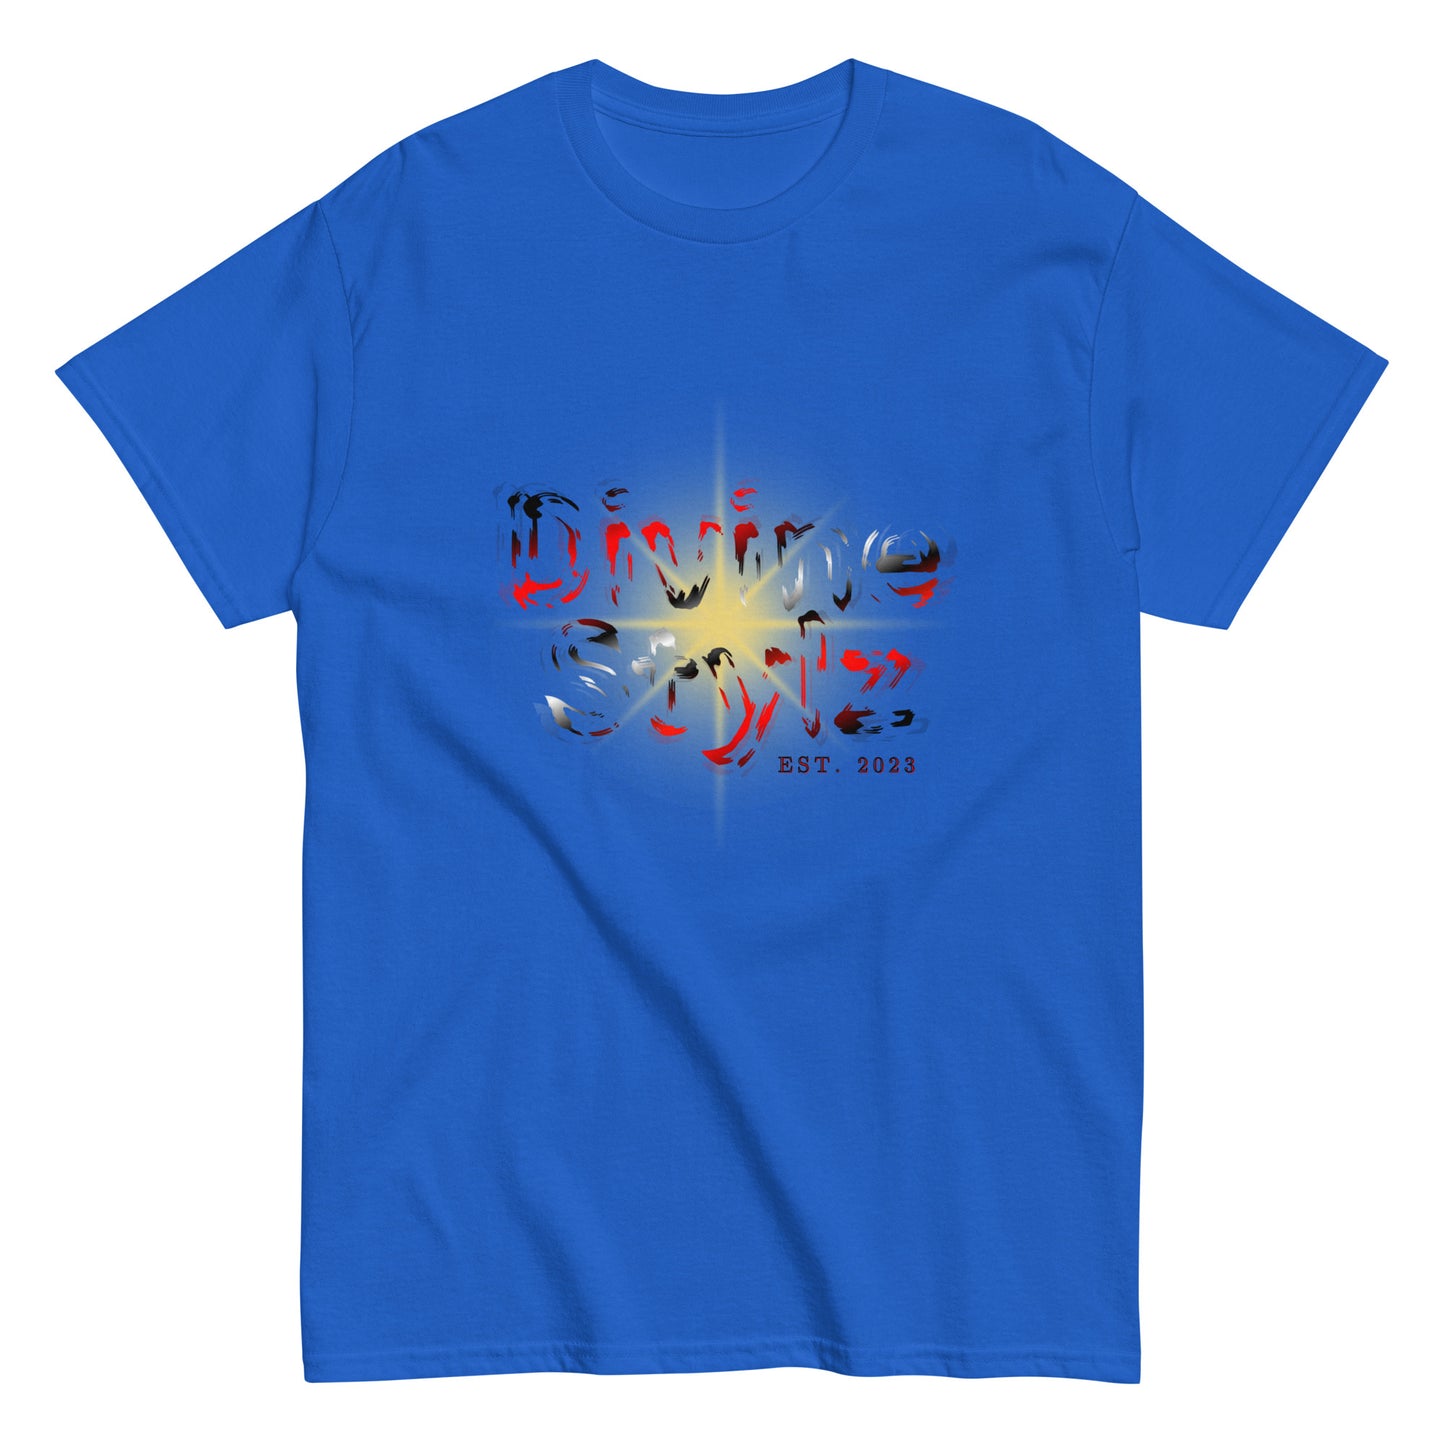 Men's classic tee - Divine Stylz 'Shattered Star'